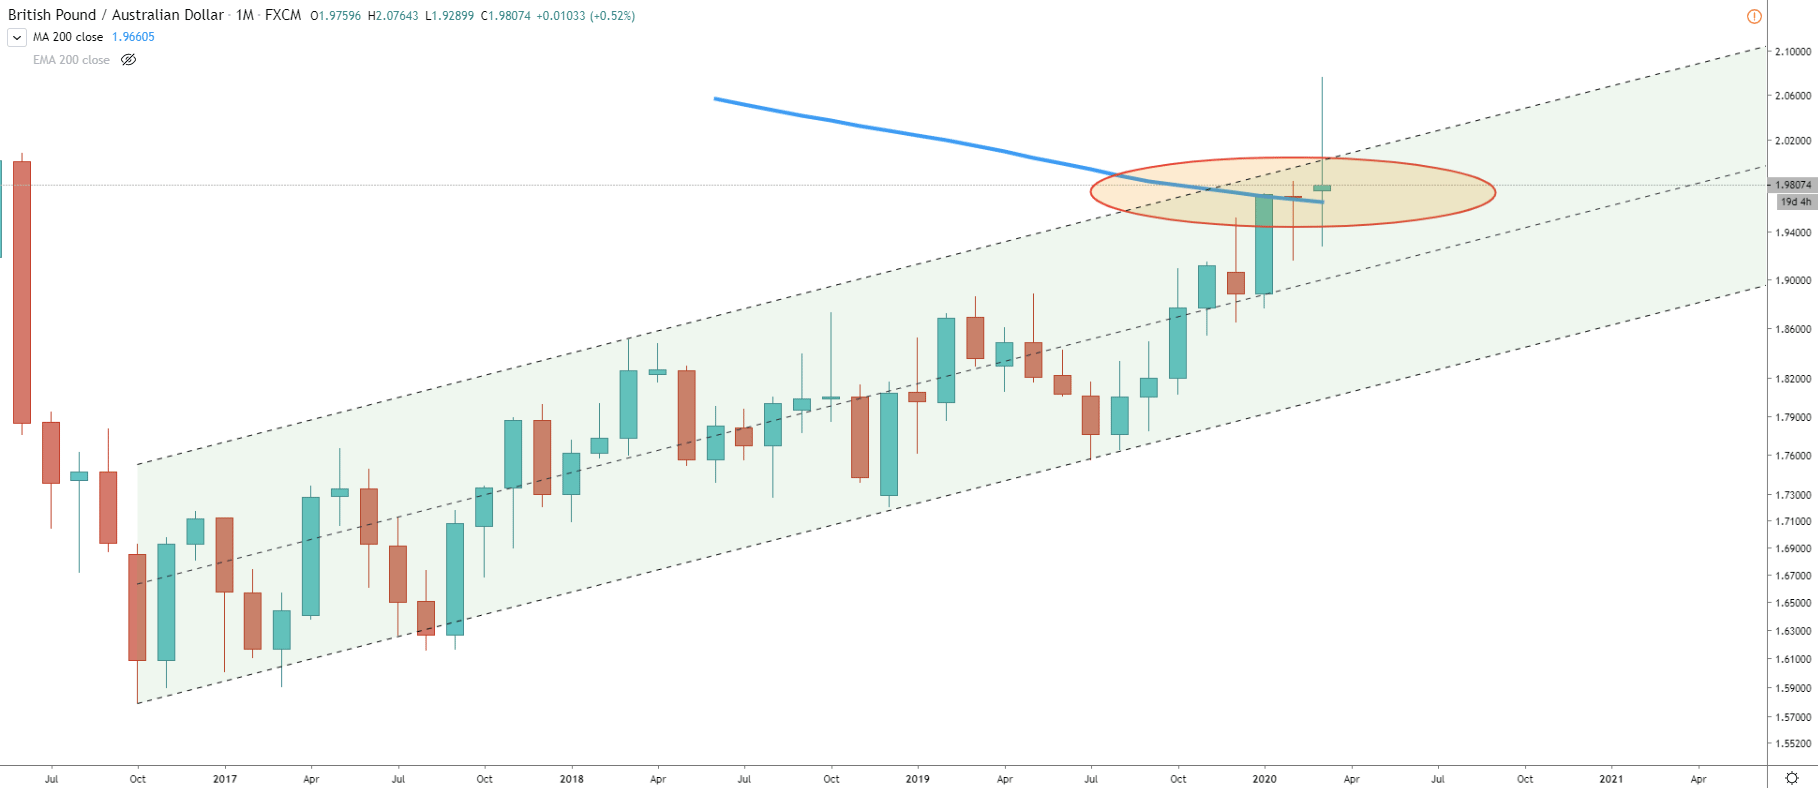 GBP/JPY Monthly Technical Analysis 13 Mar 2020